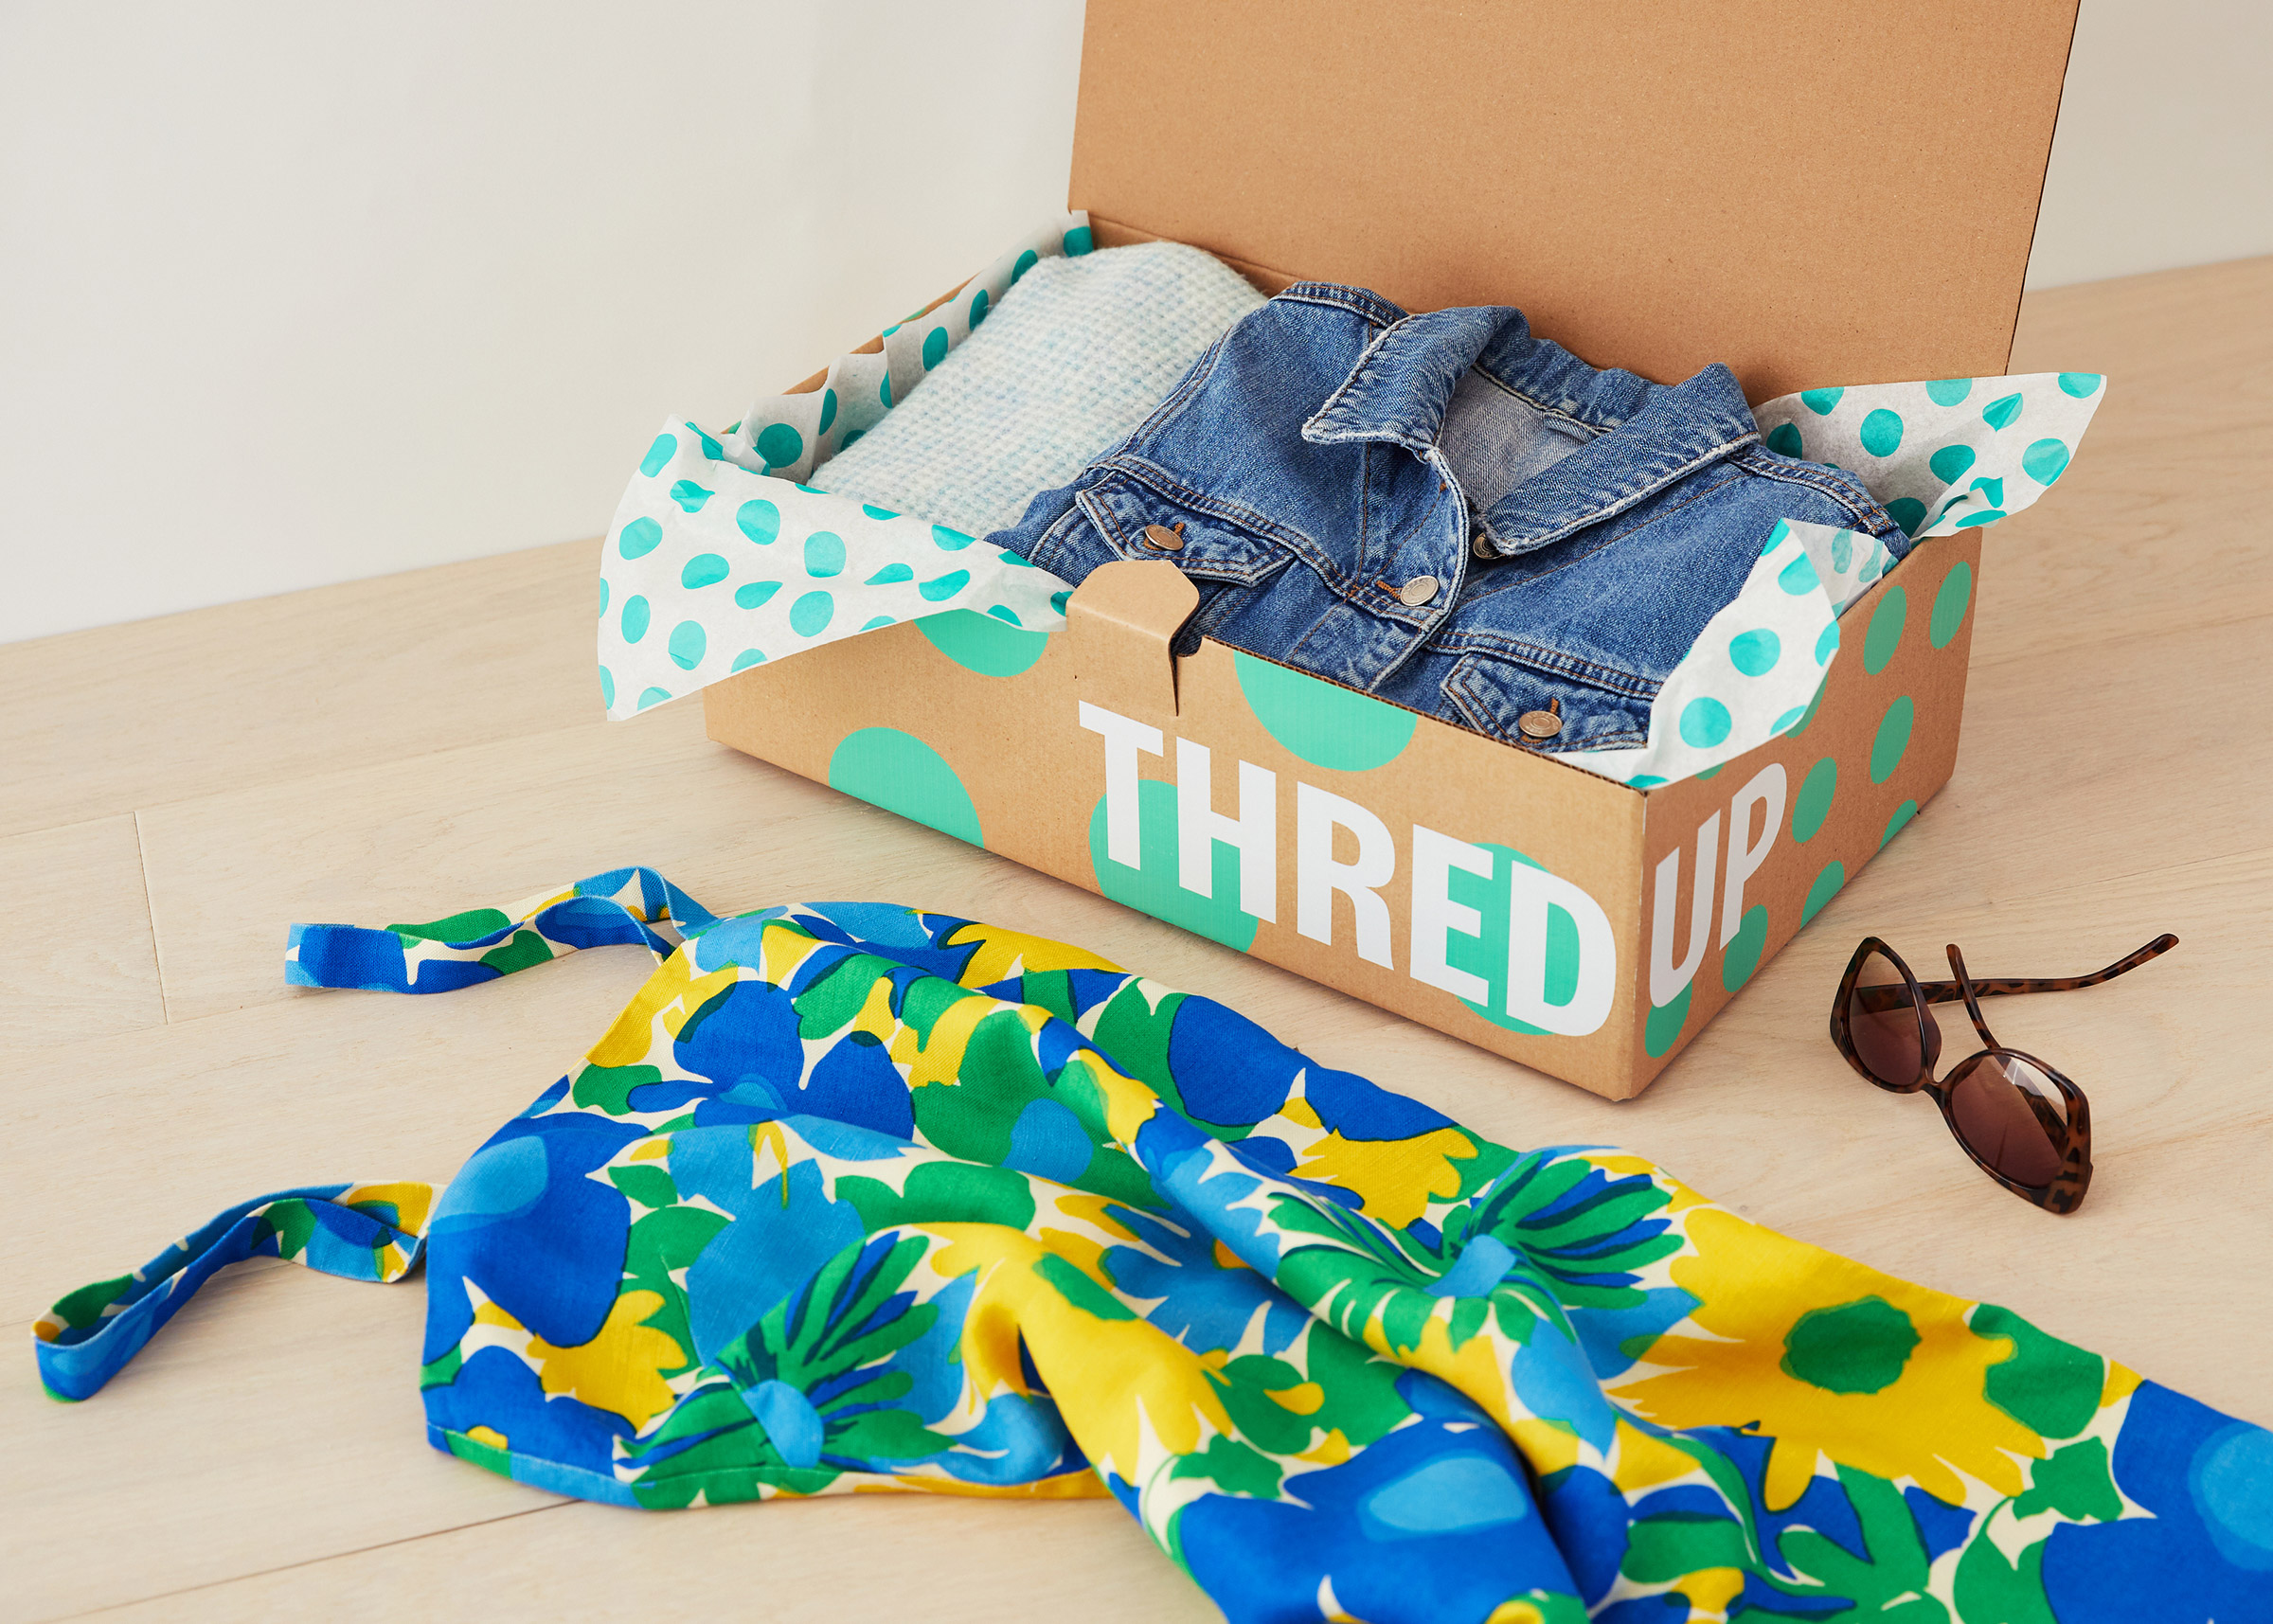 thredUP is an online clothing consignment and thrifting company. (Courtesy of thredUP)